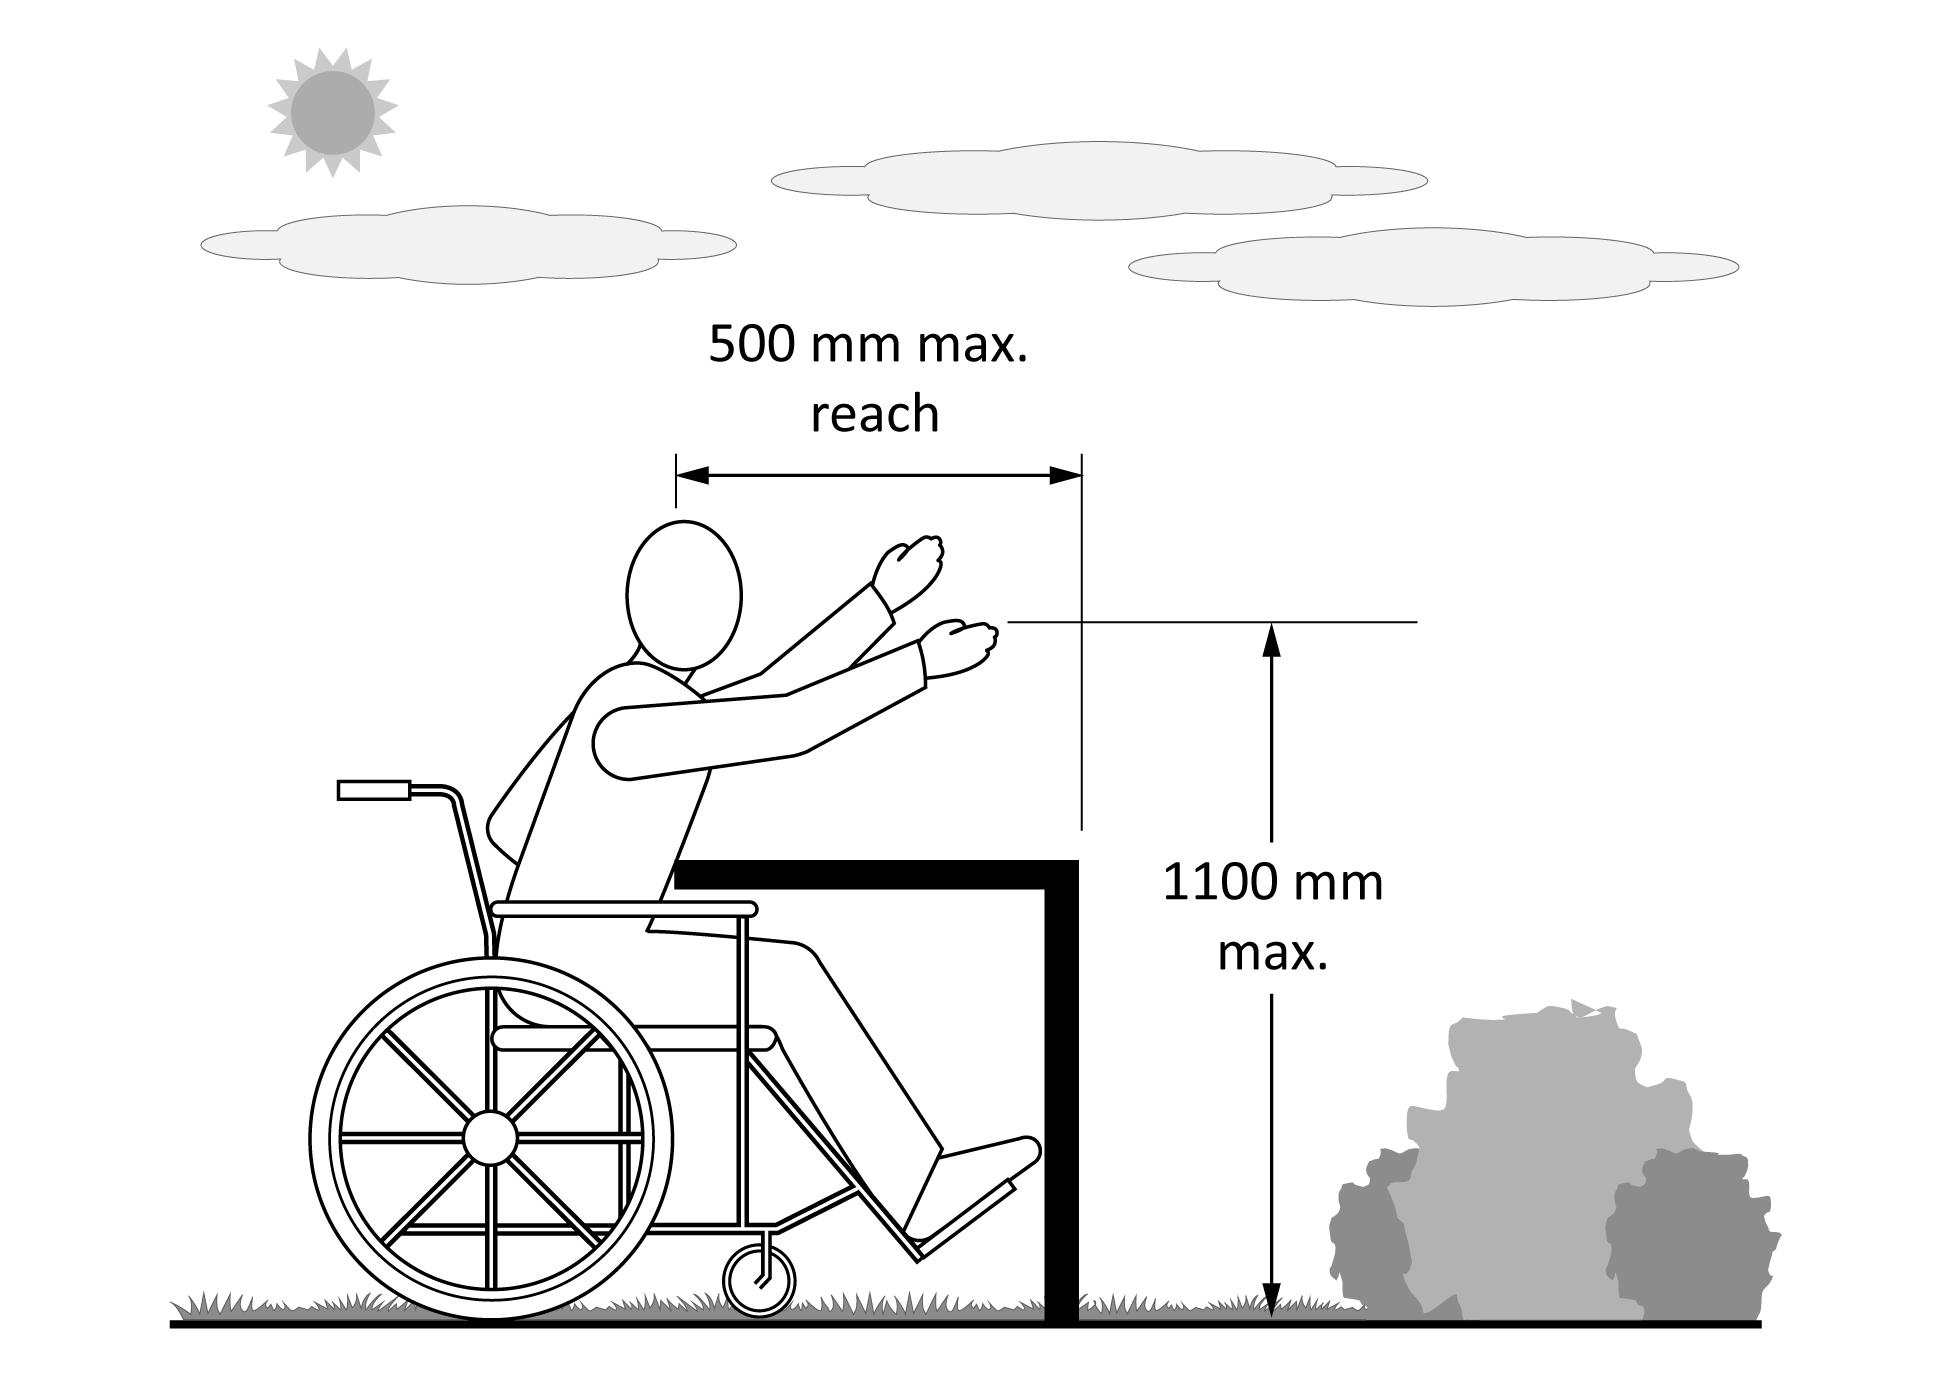 This figure shows a person using a wheelchair with their legs underneath a counter-style obstacle. The person is leaning forward slightly with their arm outstretched, illustrating the furthest a person in a wheelchair can reach over the obstacle. The person’s maximum reach height of 1100 mm and maximum depth of obstruction of 500 mm are shown.